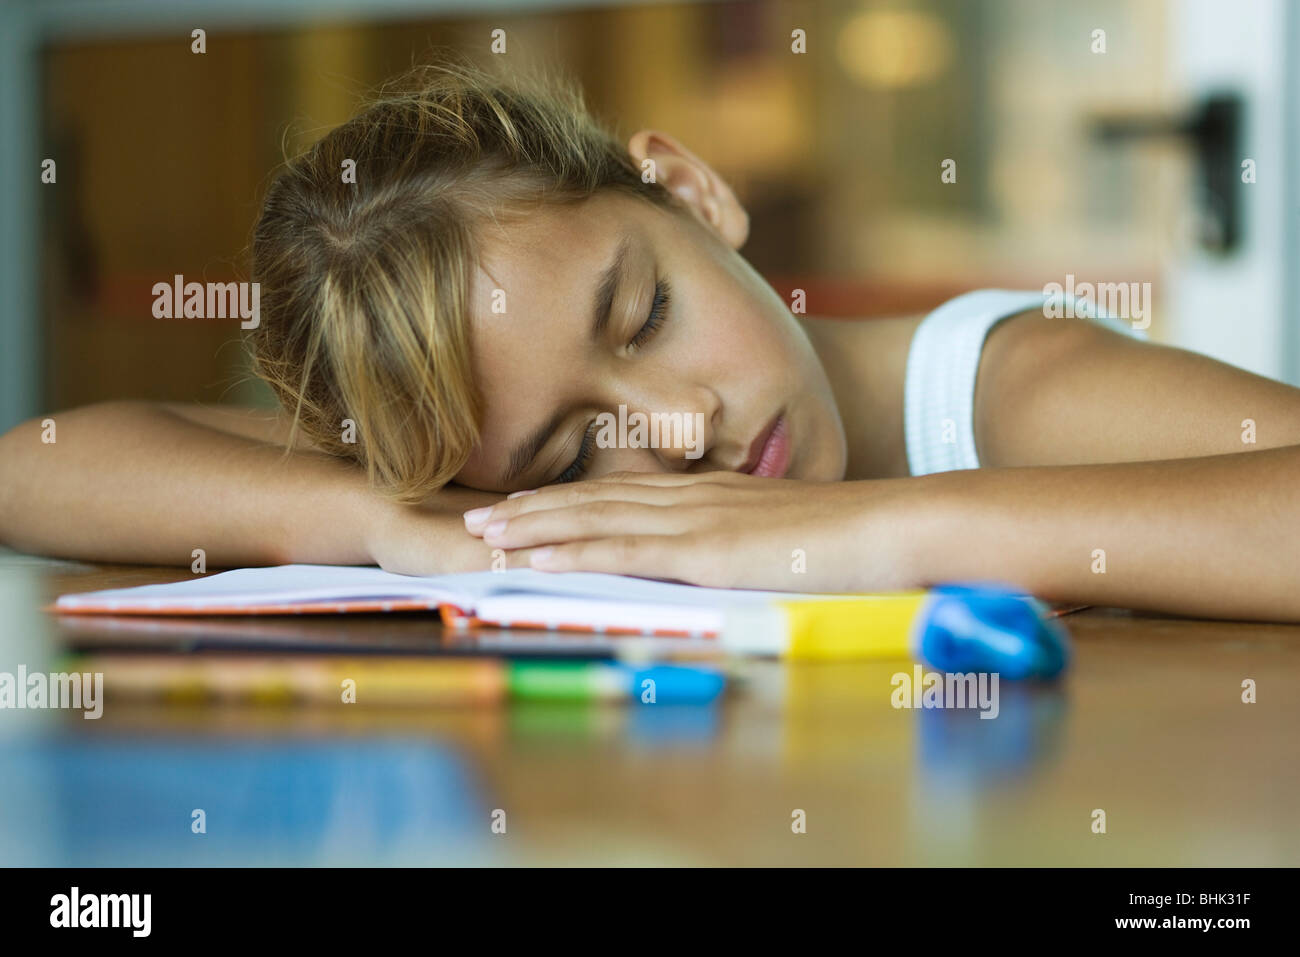 Preteen girl napping, resting head on arms laid across open book Stock Photo